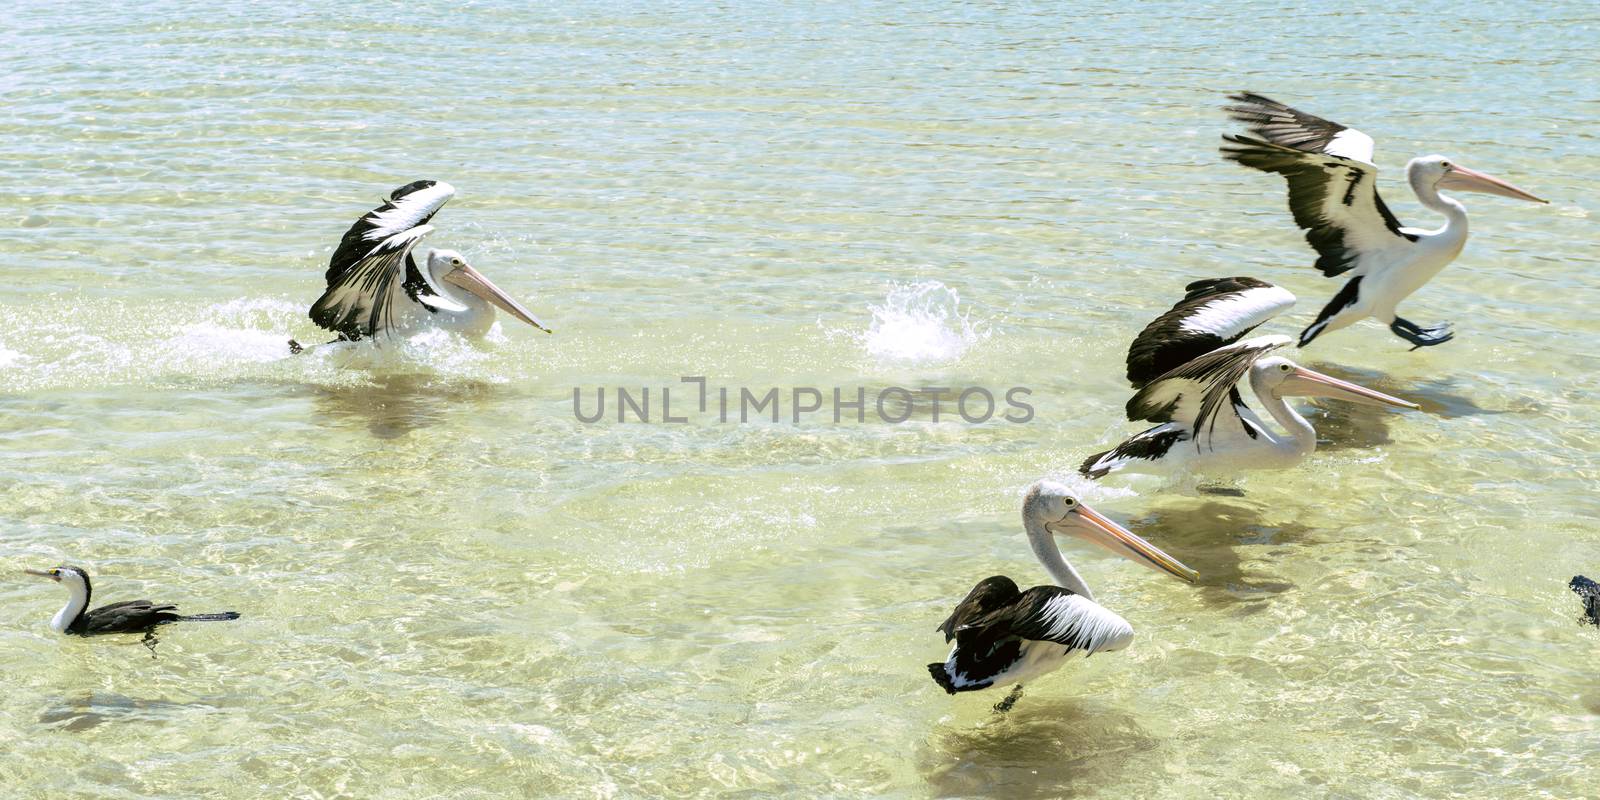 Pelicans swimming in the water by artistrobd